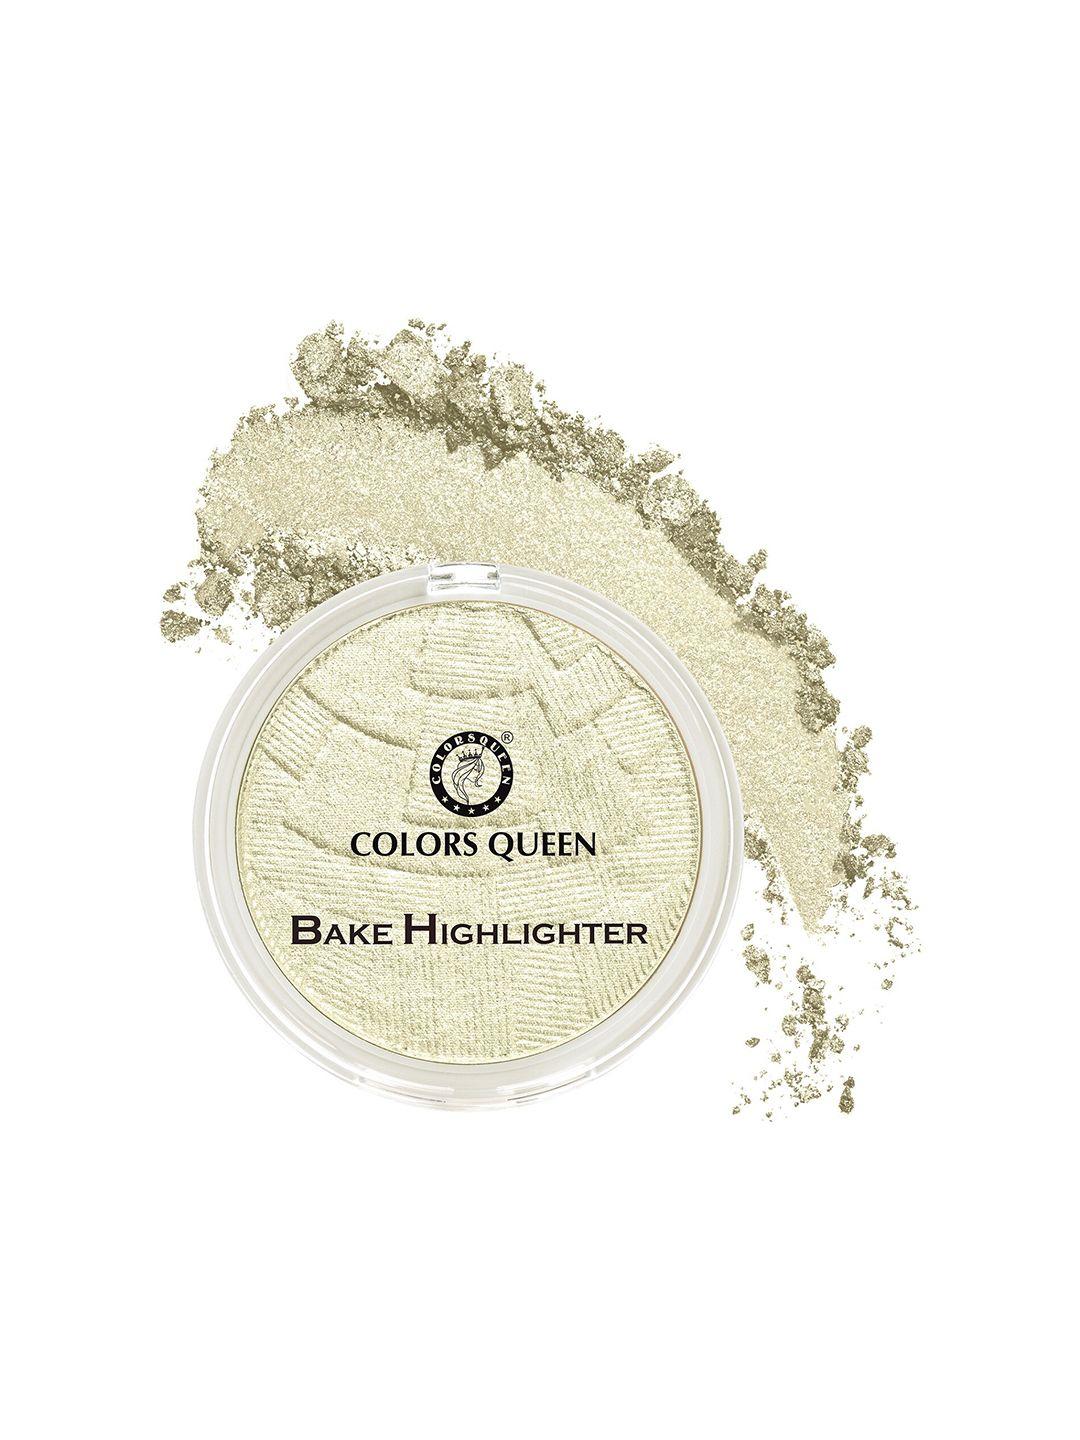 colors queen water proof shimmer baked highlighter 20g -silver stone 02